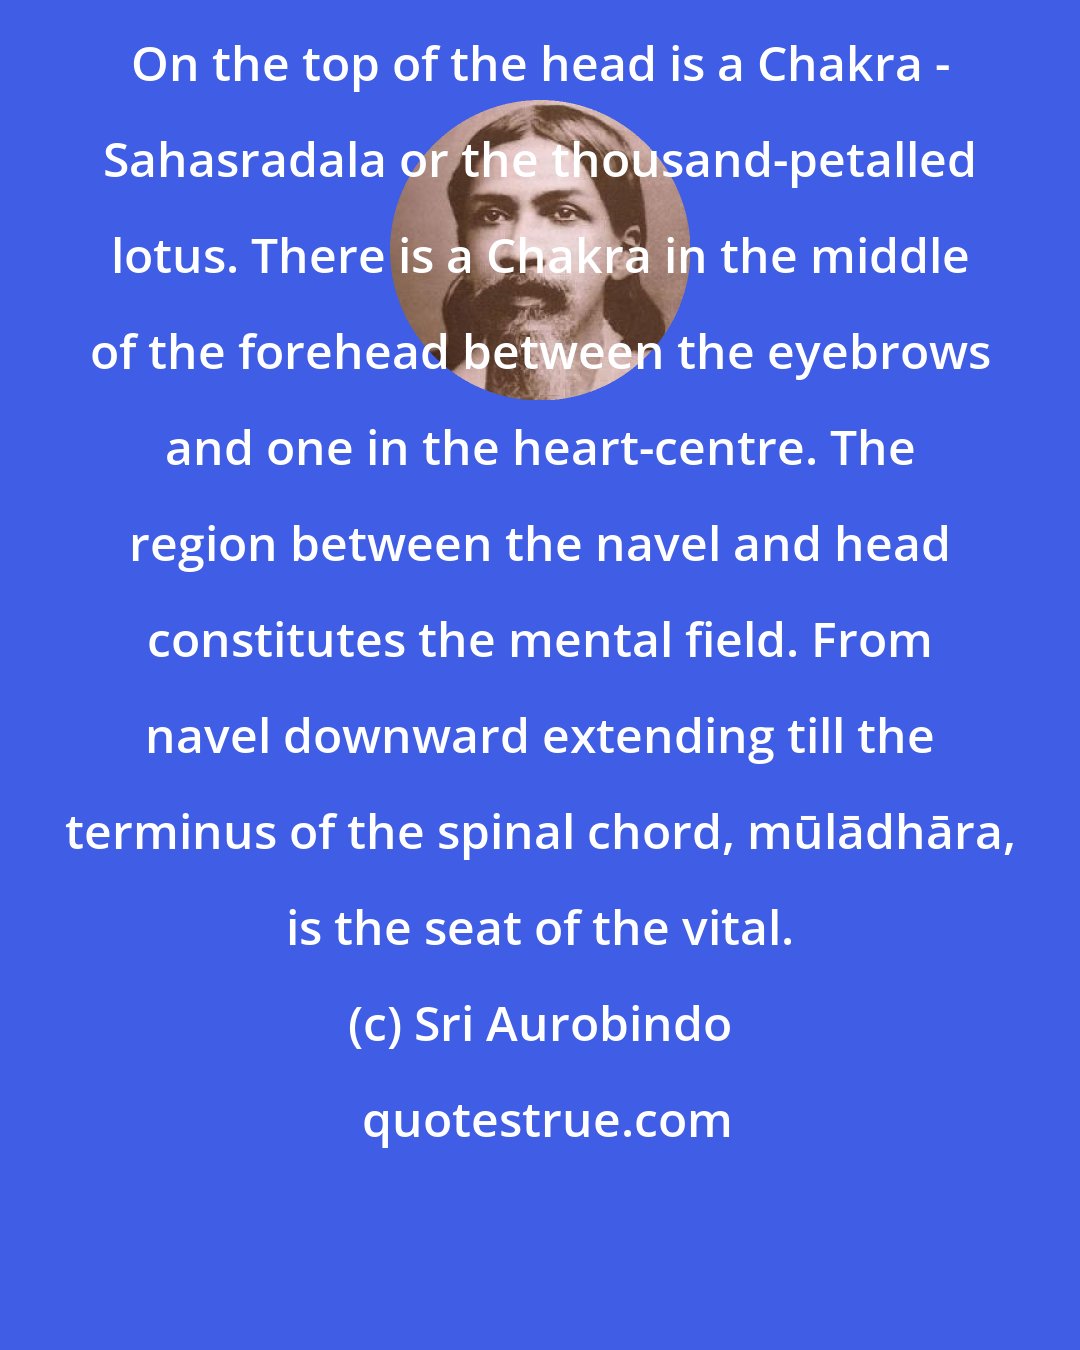 Sri Aurobindo: On the top of the head is a Chakra - Sahasradala or the thousand-petalled lotus. There is a Chakra in the middle of the forehead between the eyebrows and one in the heart-centre. The region between the navel and head constitutes the mental field. From navel downward extending till the terminus of the spinal chord, mūlādhāra, is the seat of the vital.